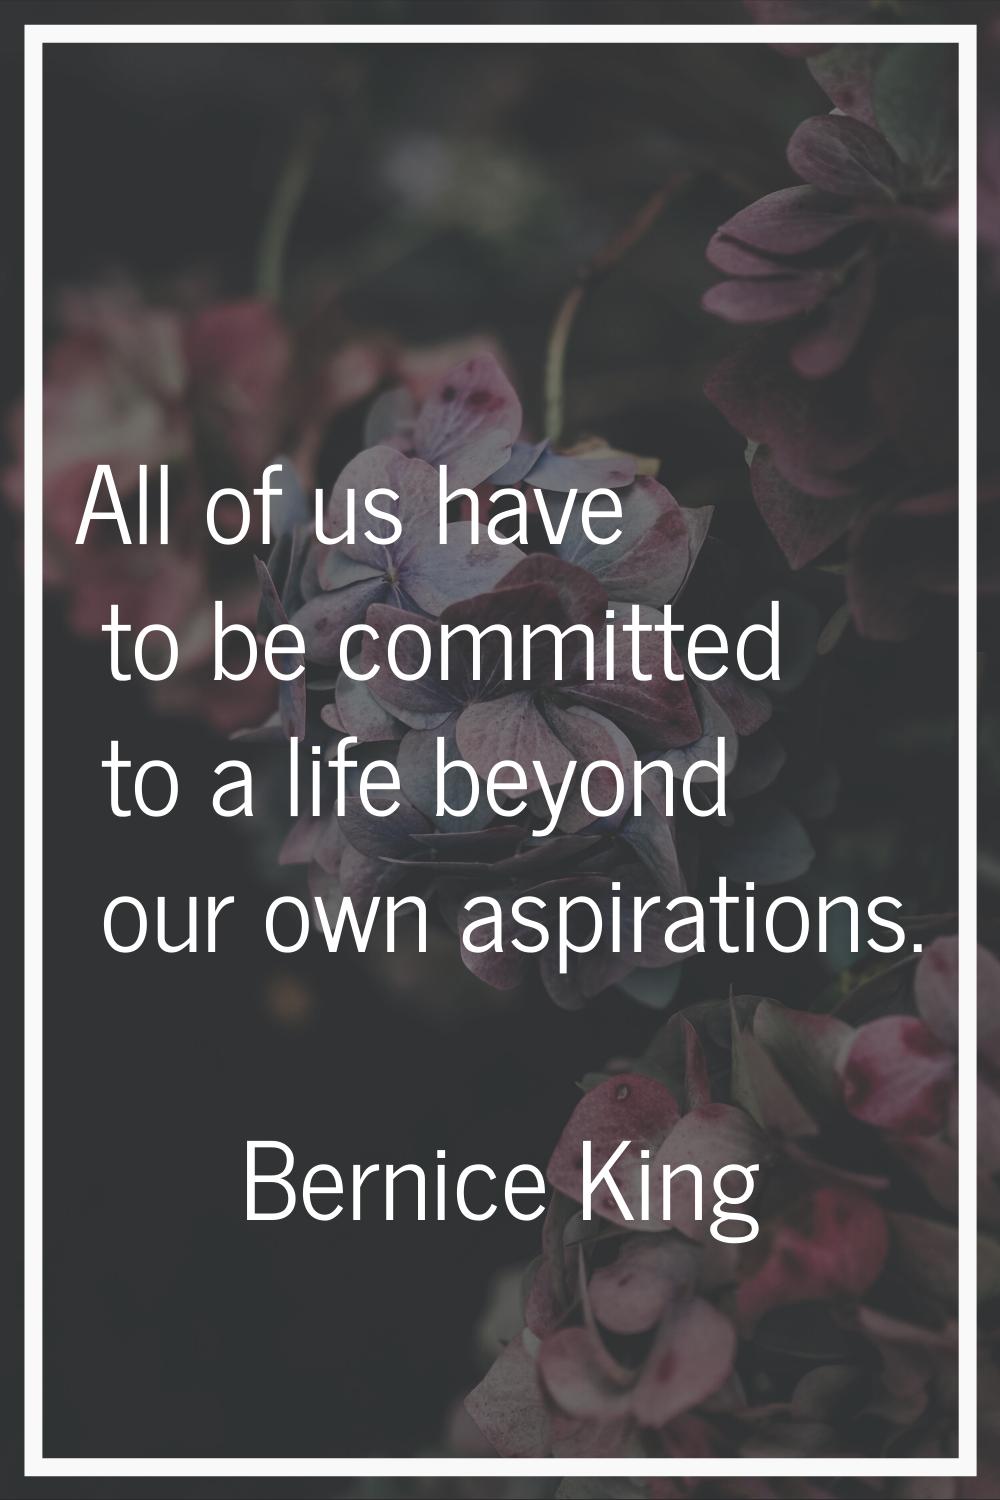 All of us have to be committed to a life beyond our own aspirations.